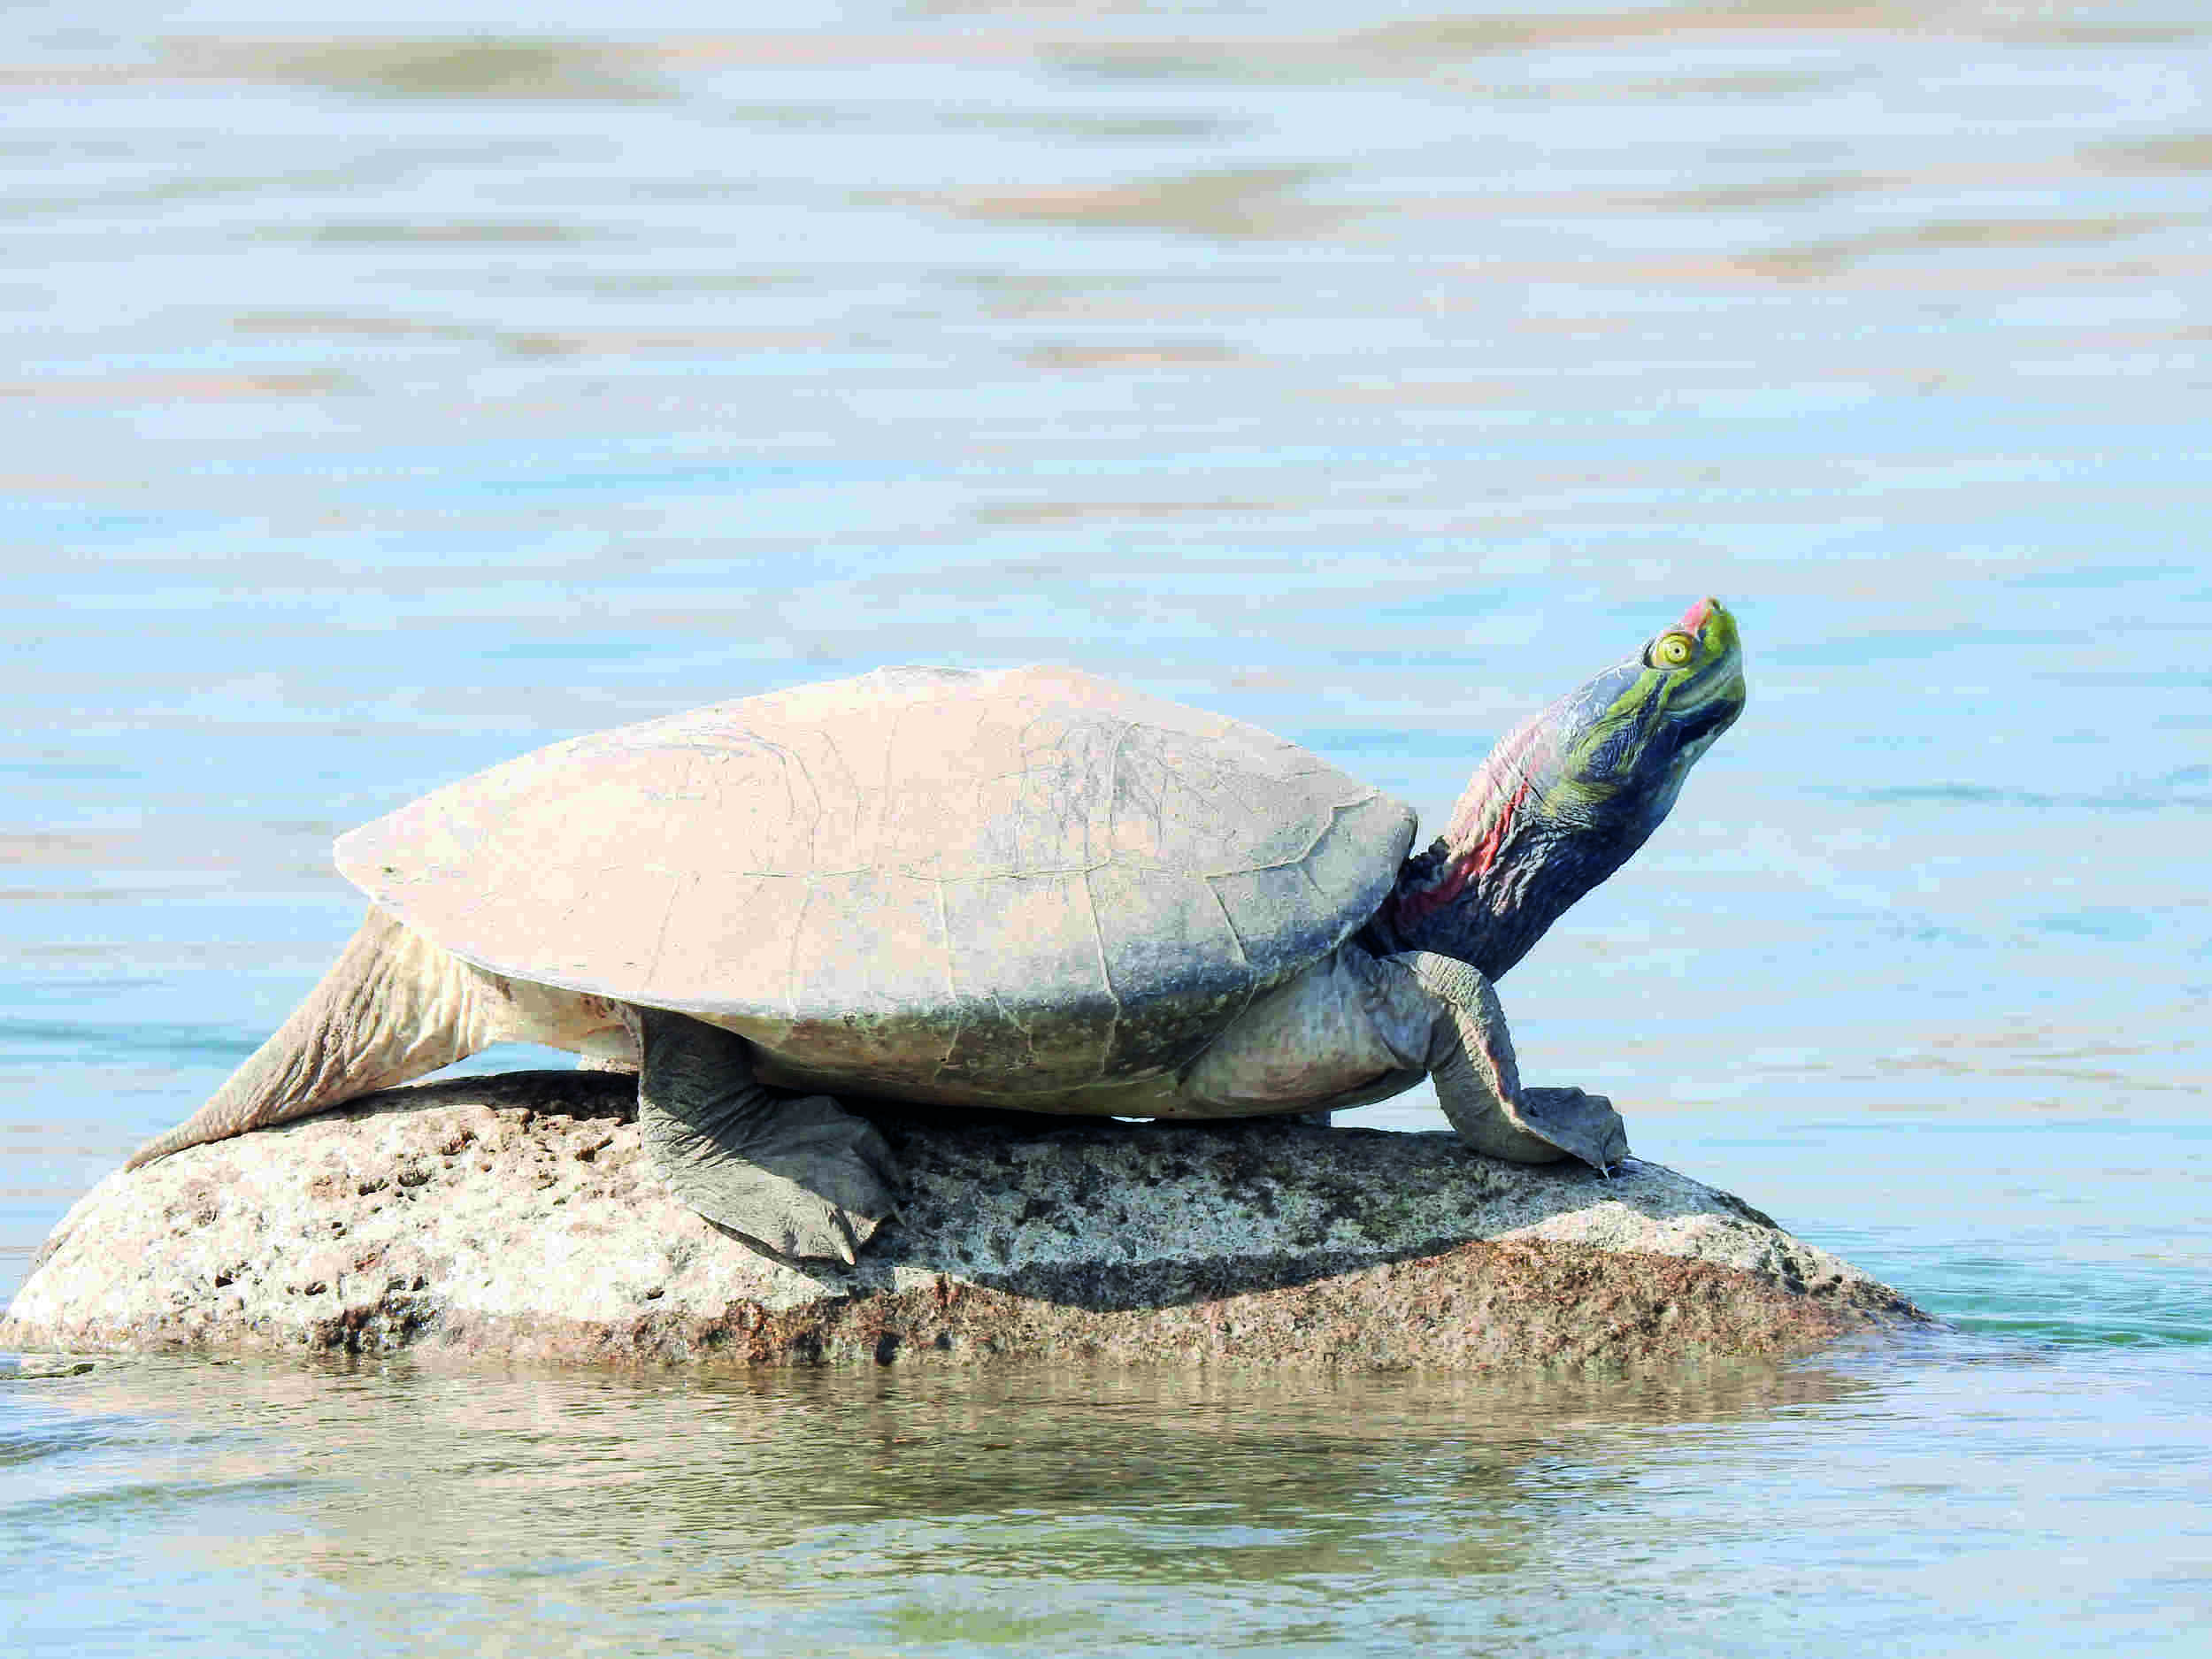 India moots proposal to give better protection to red-crowned roofed turtle at wildlife conference